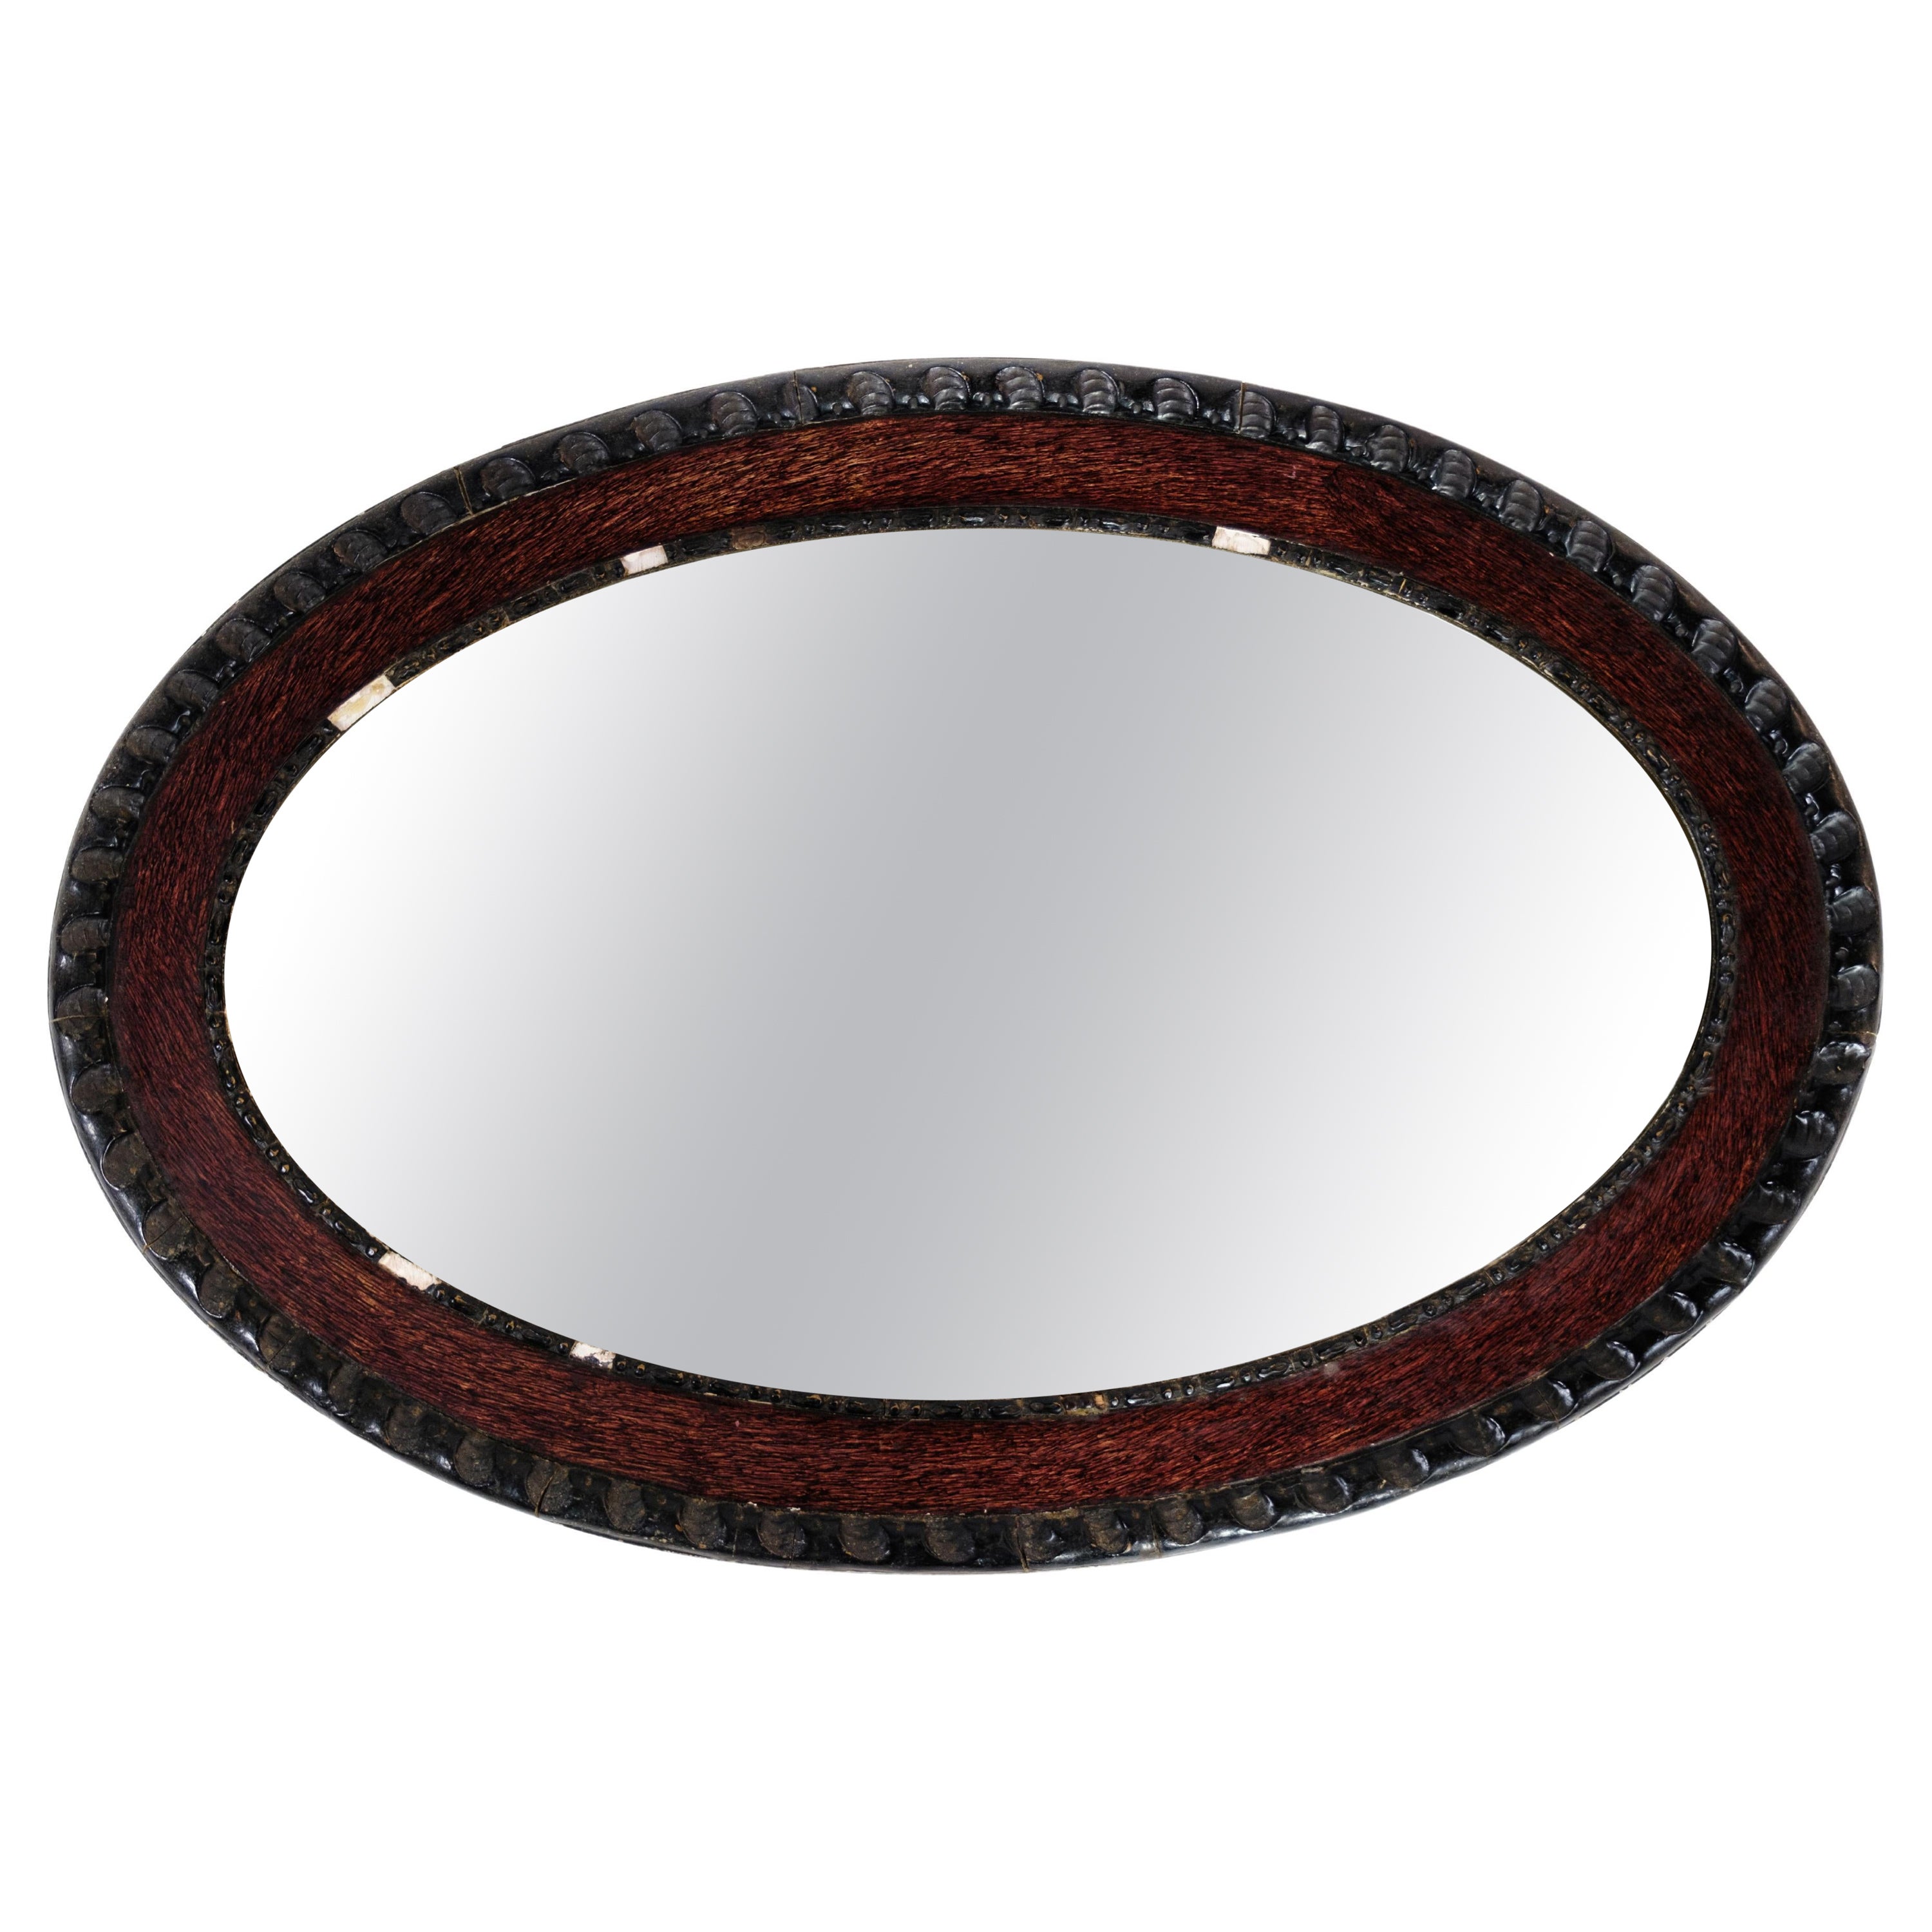 Oval Mirror With A Dark Wood Frame From 1920s